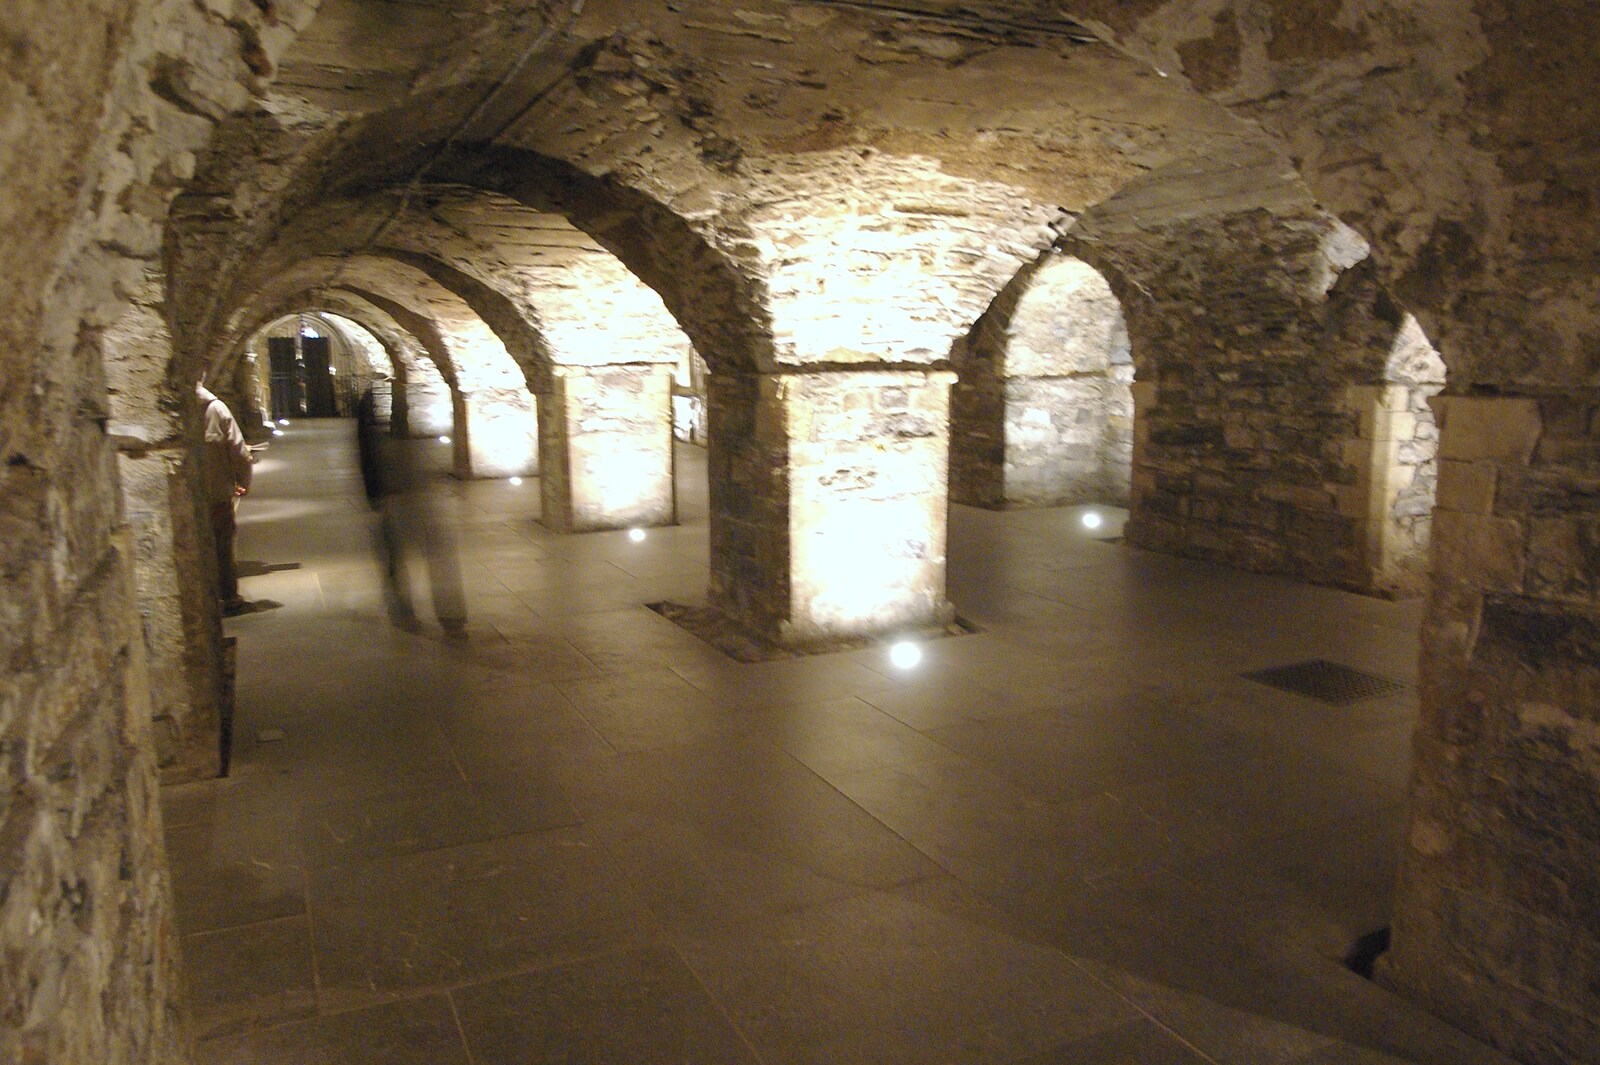 Blackrock and Dublin, Ireland - 24th September 2007: The 11th-century crypt - one of the largest in Ireland or Britain